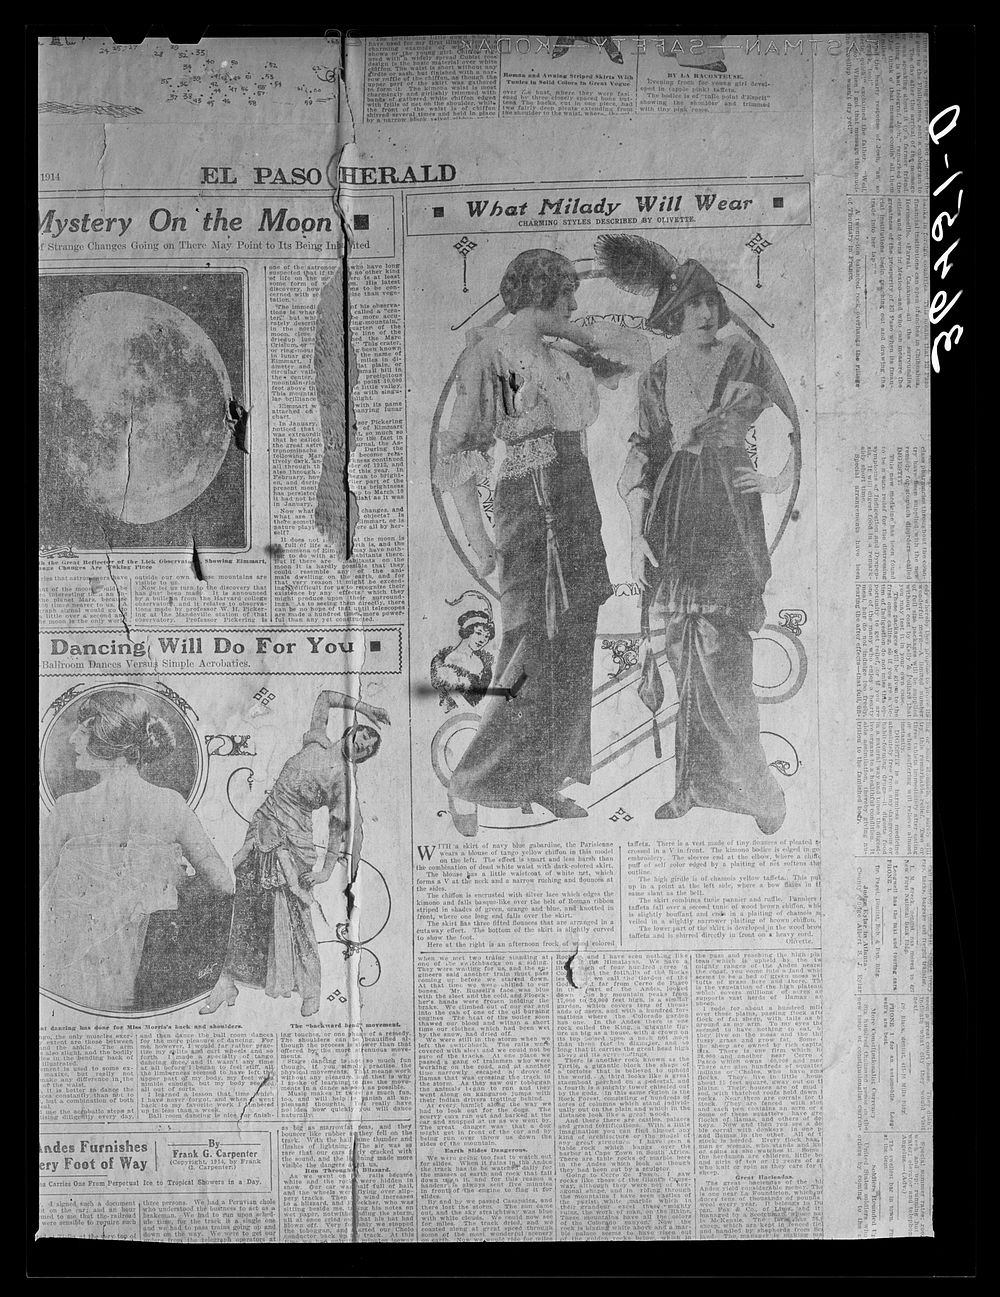 [Untitled photo, possibly related to: Sheet of El Paso Herald, 1914, found in abandoned house at Gerogetown, New Mexico] by…